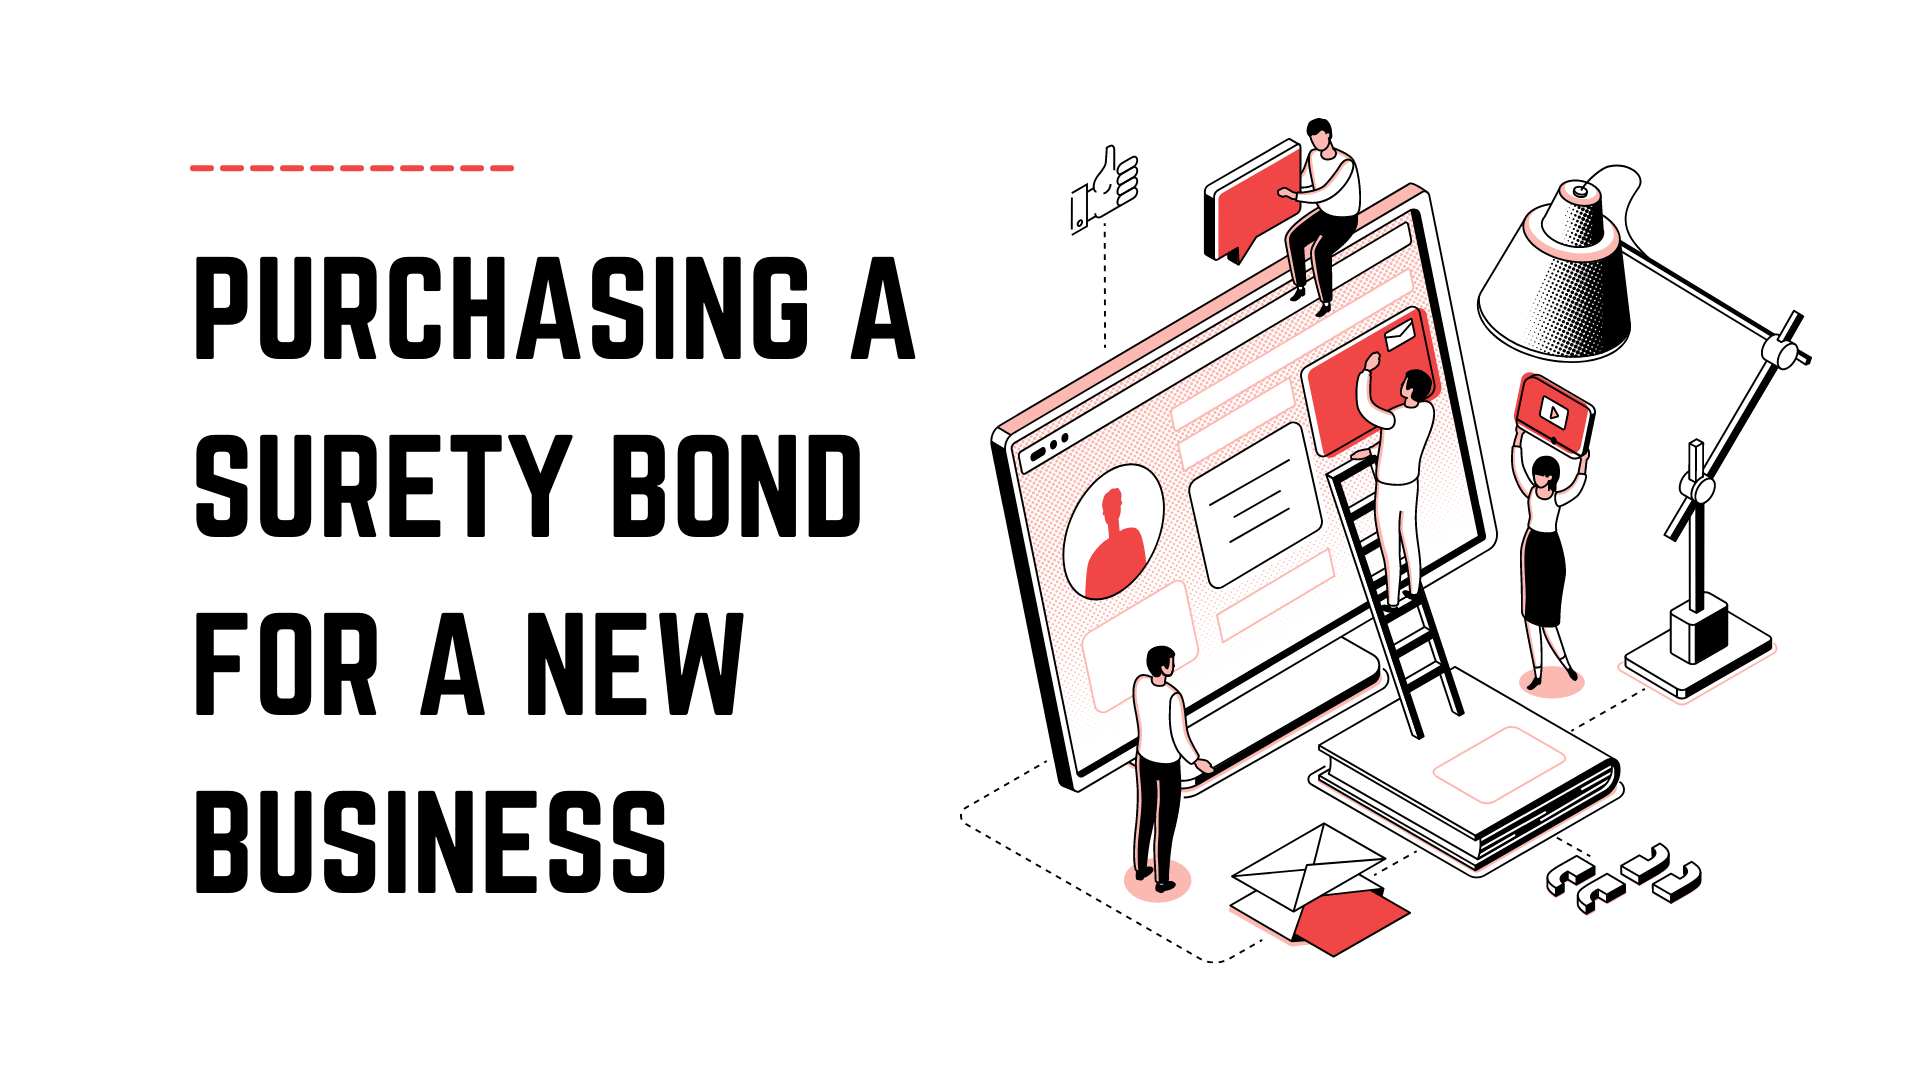 surety bond - How do I go about getting a surety bond - business concept